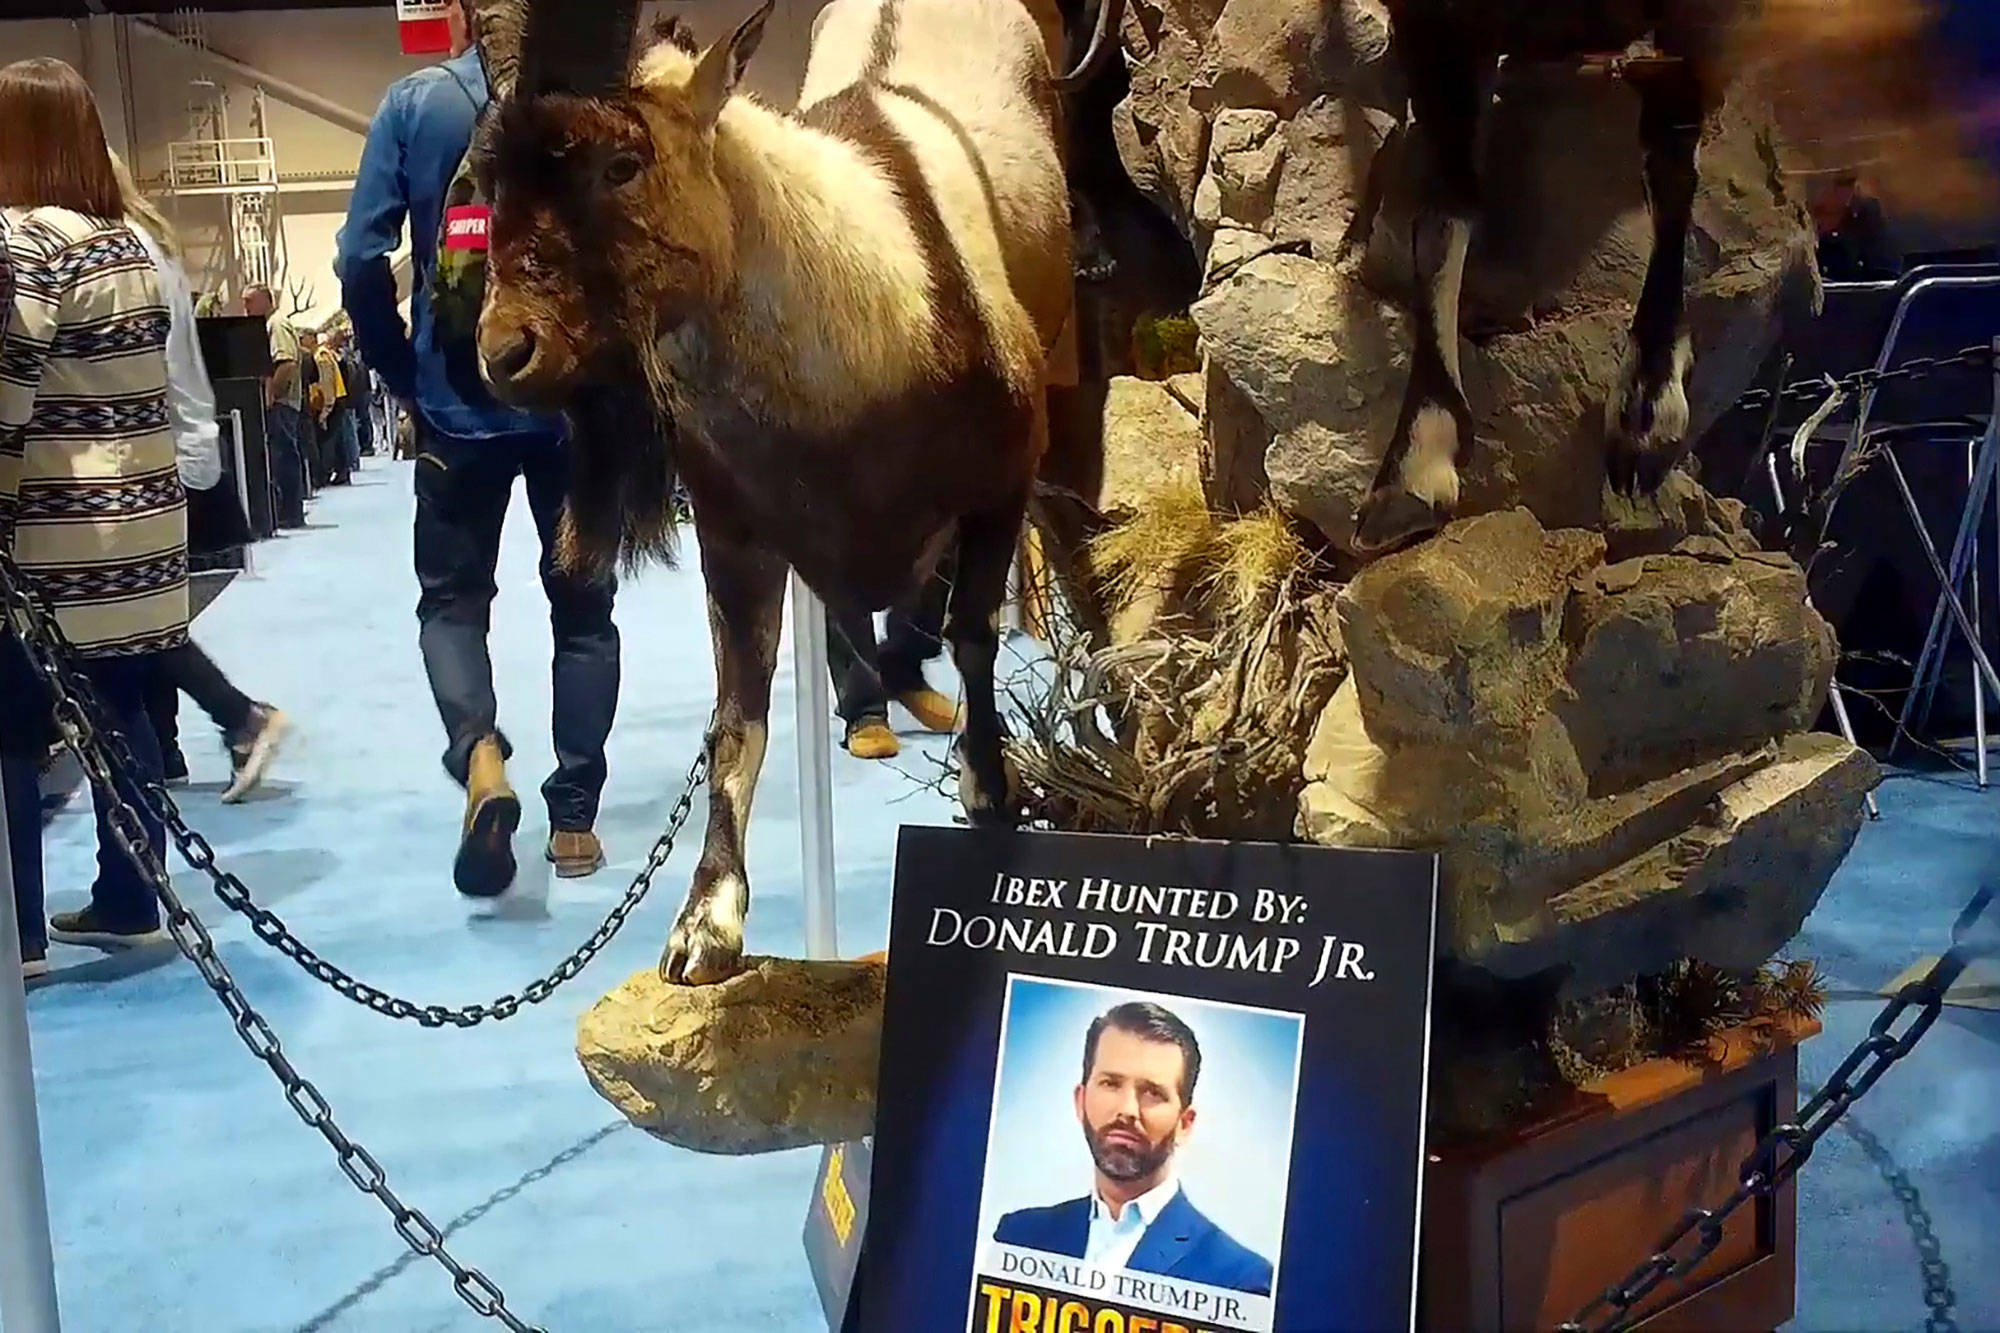 Humane Society of the United States                                 This file image from video shows taxidermy hunted by Donald Trump Jr. at the Safari Club International’s 2020 annual convention held in Reno, Nevada.